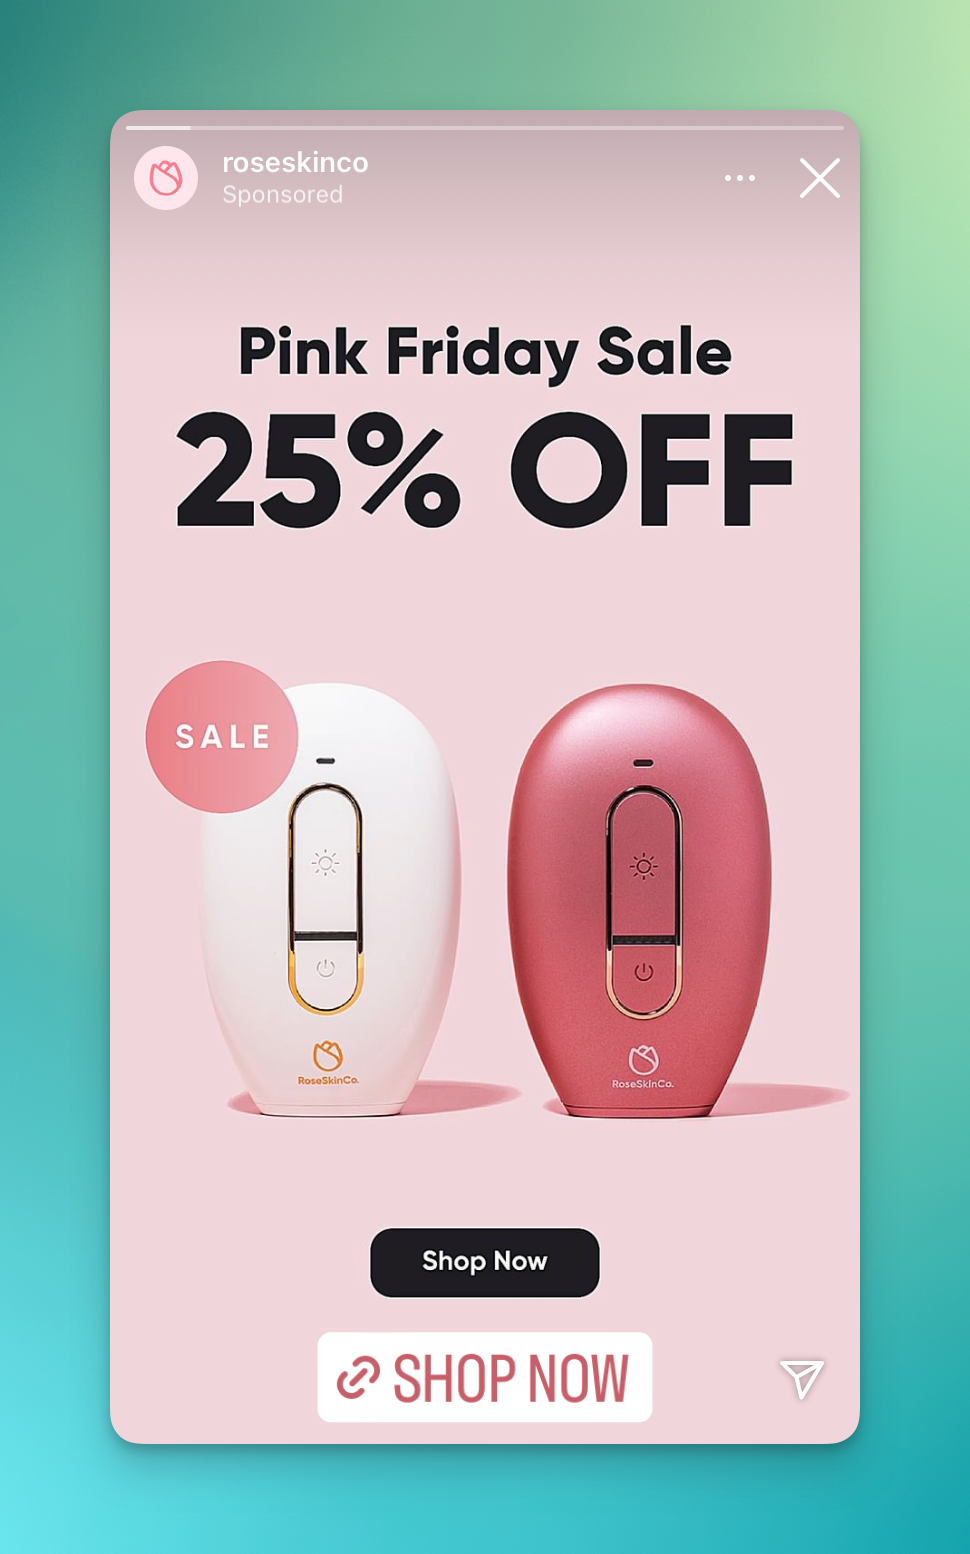 An Instagram Story ad from RoseSkinCo. featuring two handheld laser hair removal devices in white and hot pink